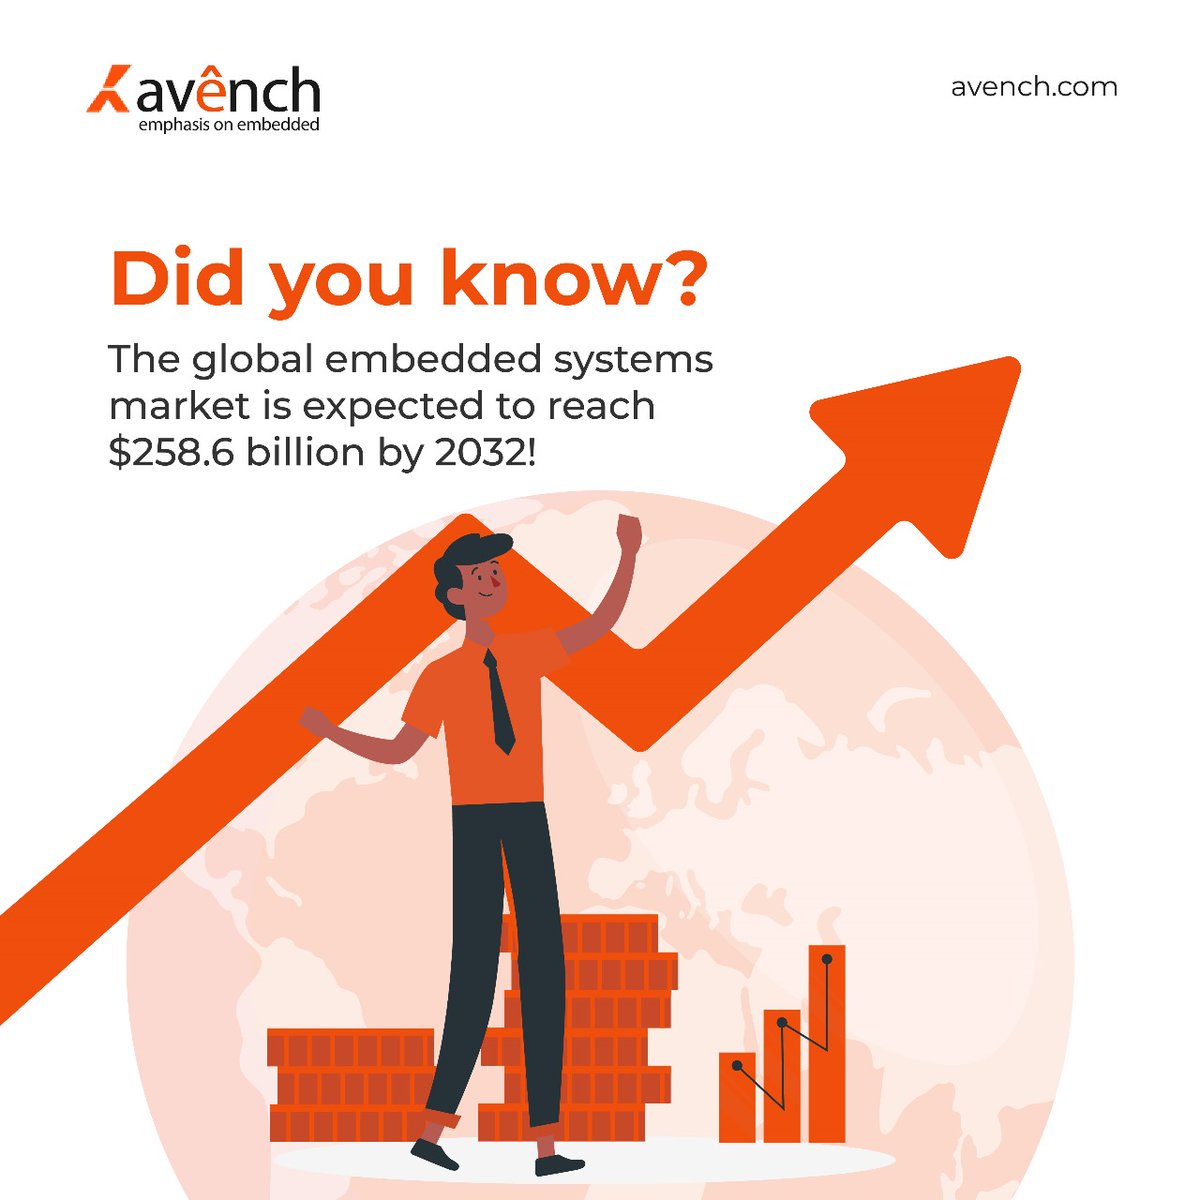 At Avench, we specialize in embedded software, hardware design, and Linux development for embedded systems. Unlock your business's potential with our comprehensive services. Contact us avench.com #avenchsystem #embeddedsystems #IOTsystem #microcontrollers